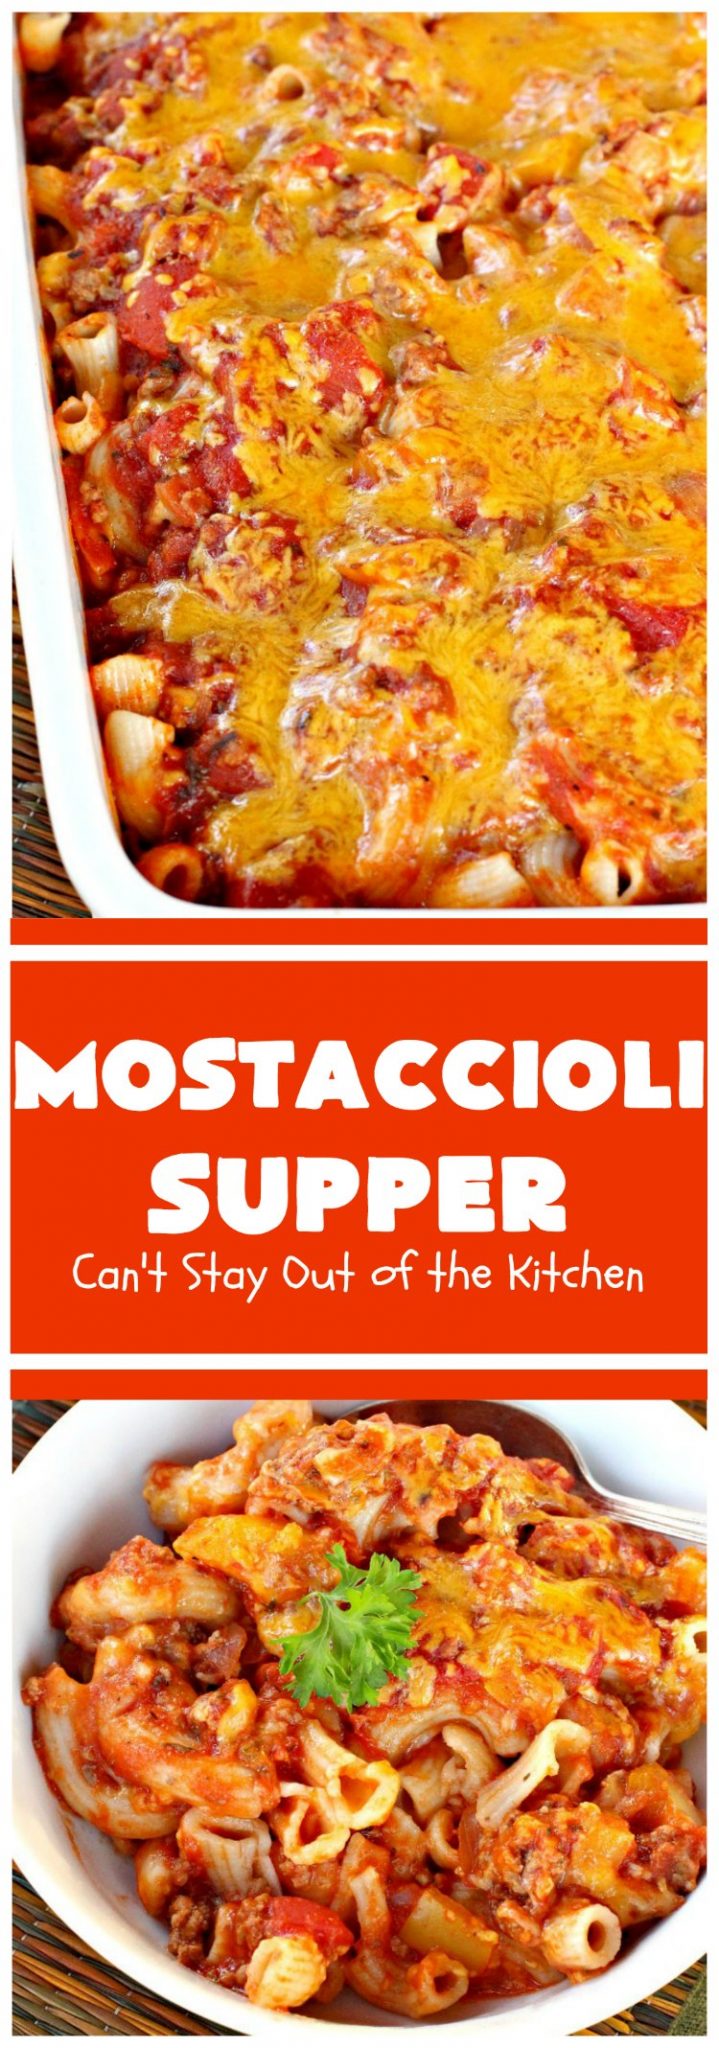 Mostaccioli Supper – Can't Stay Out of the Kitchen